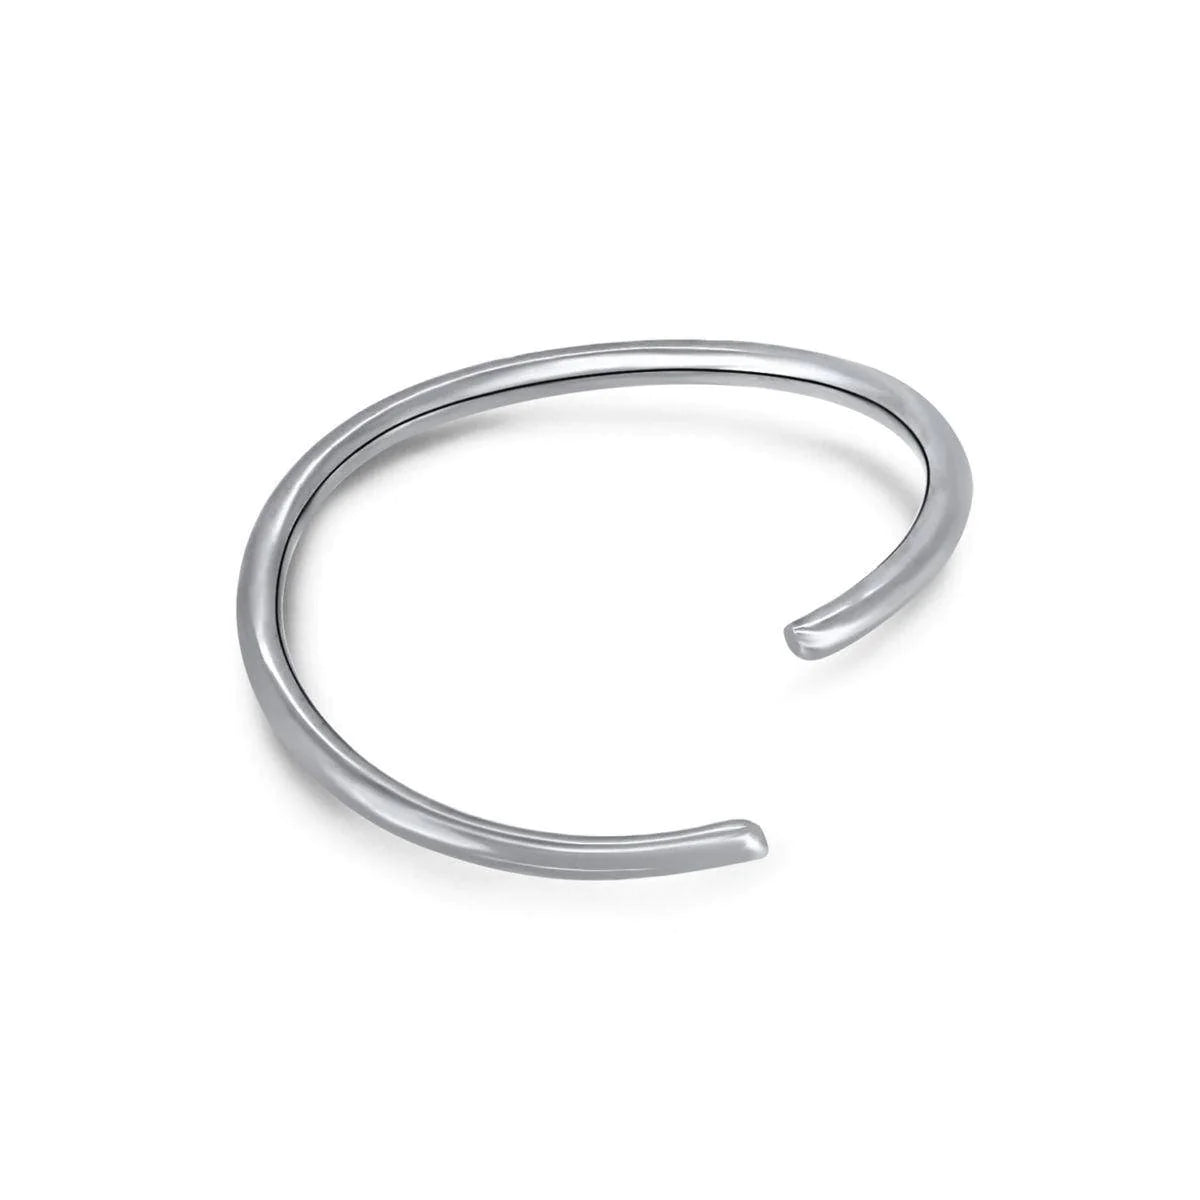 Seamless Ring / Bendable Ring